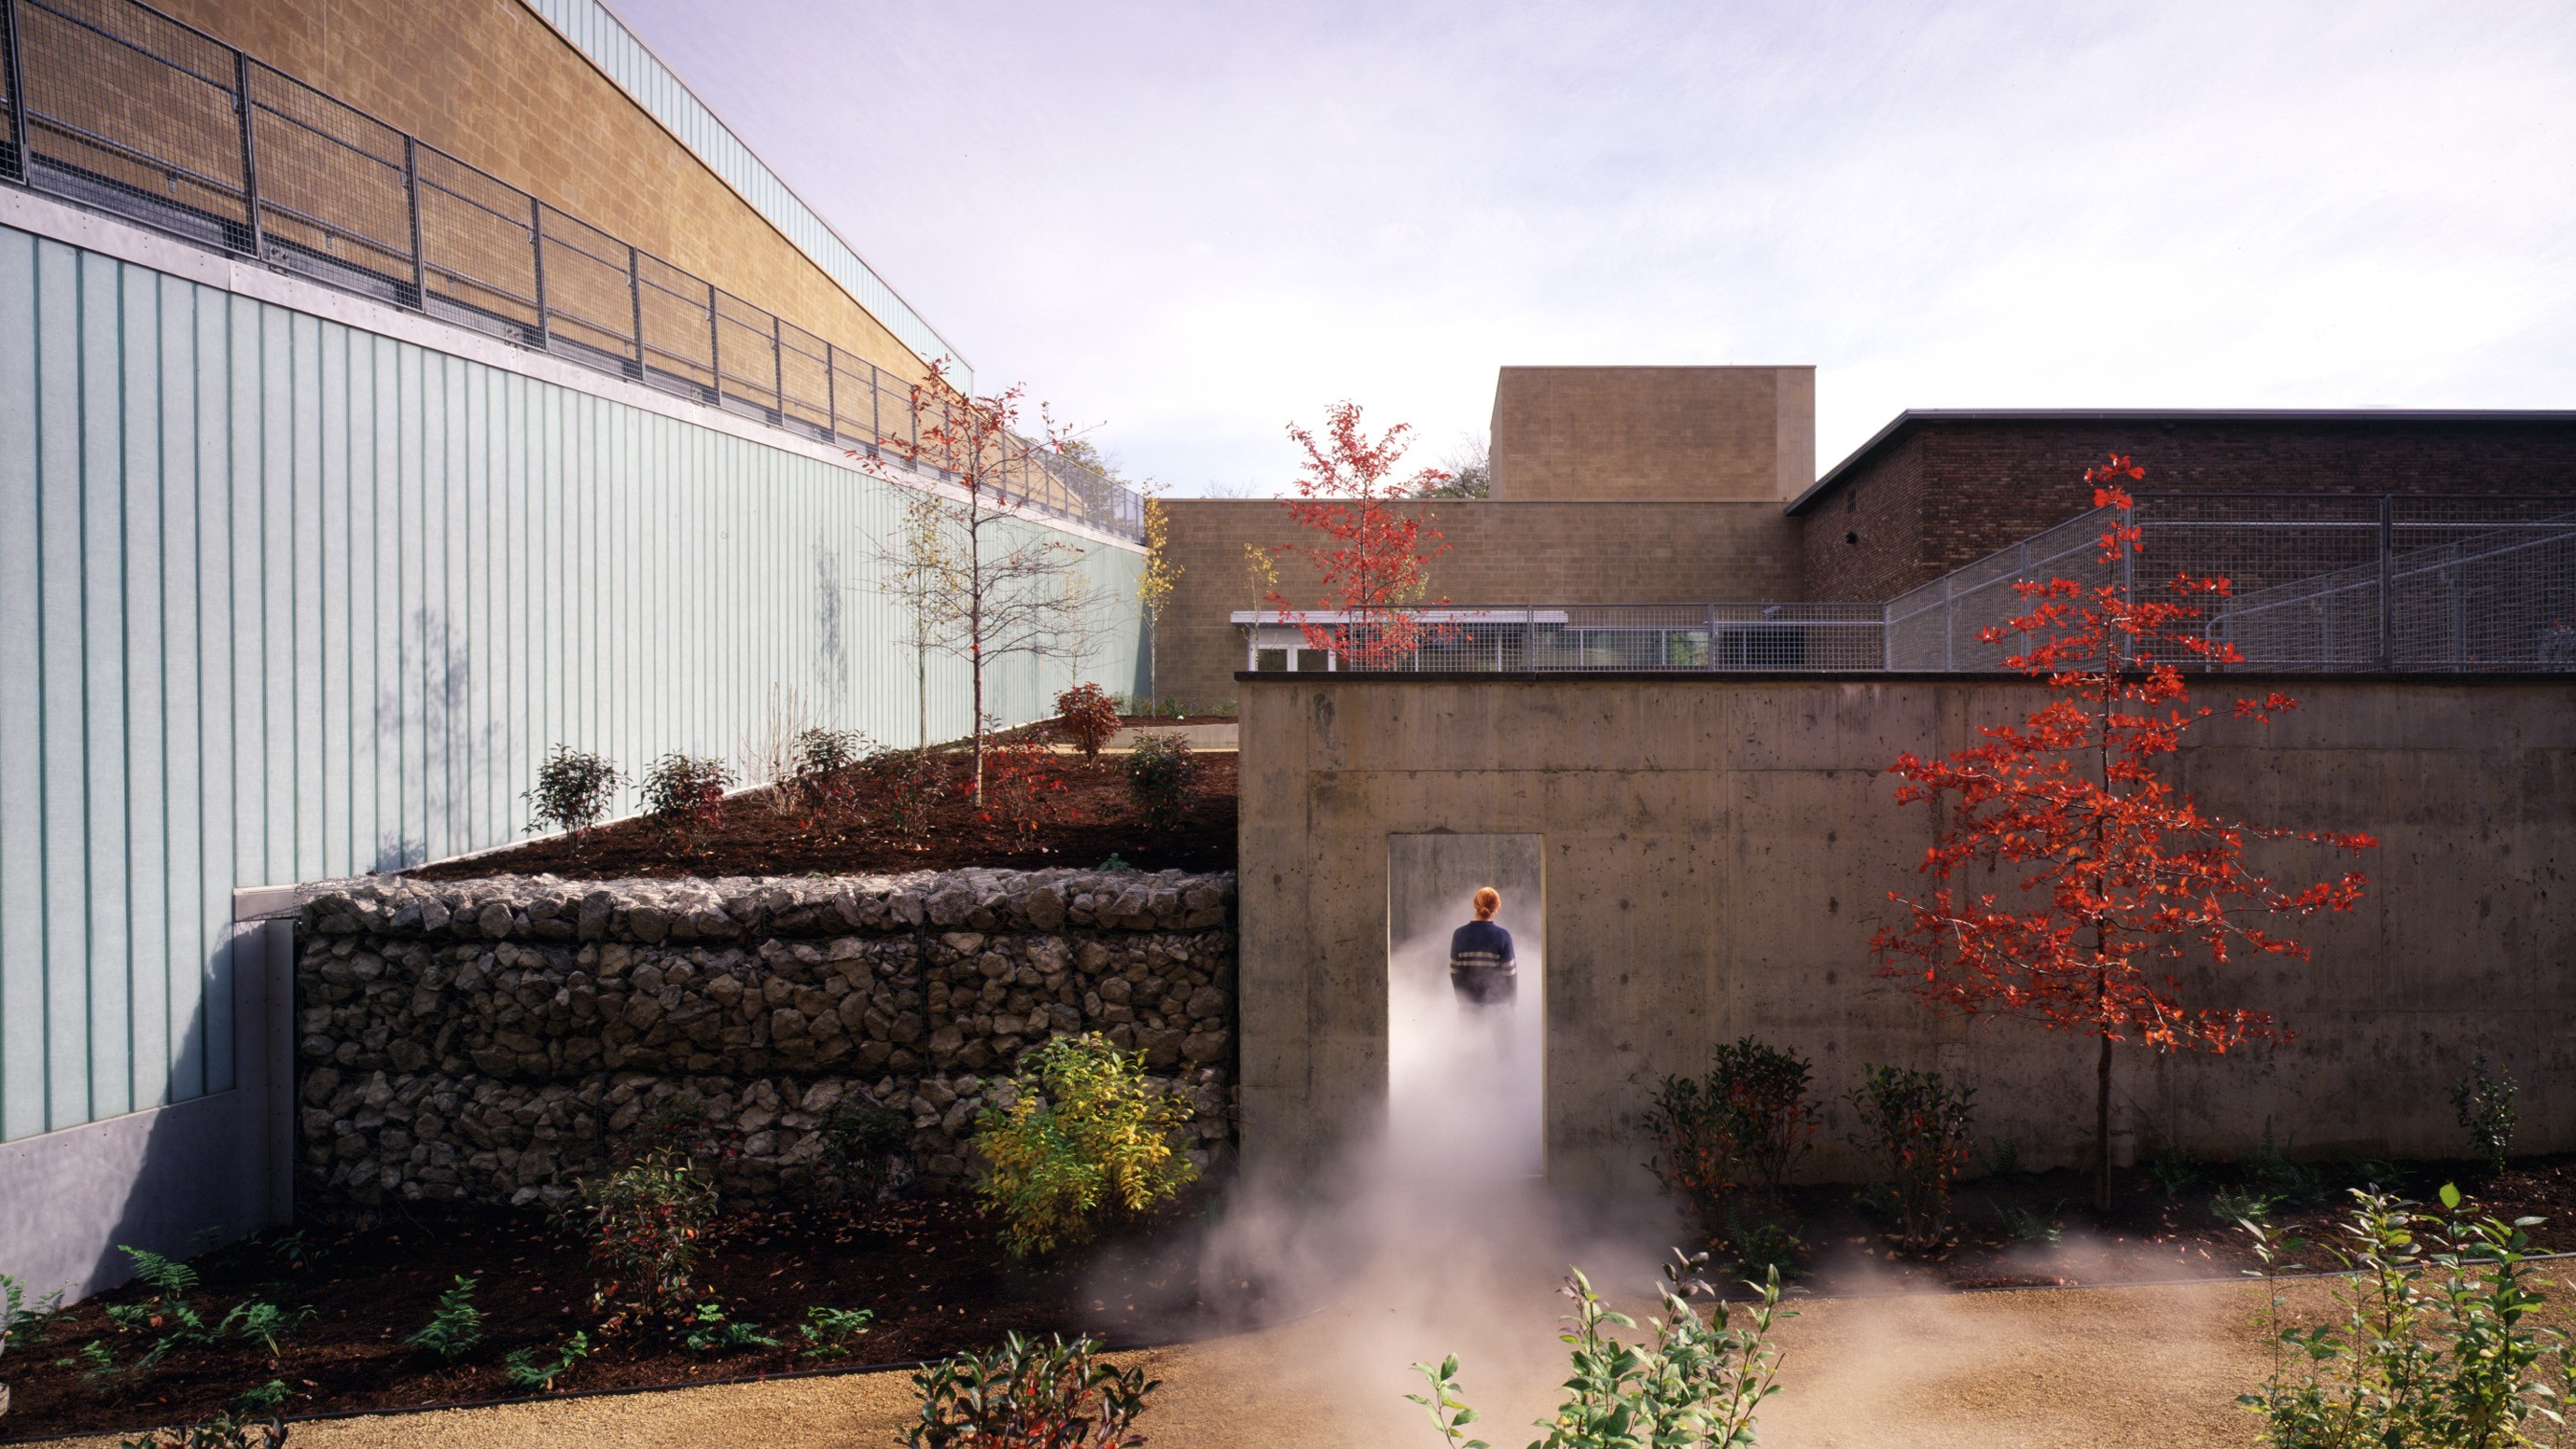 CRANBROOK INSTITUTE OF SCIENCE - STEVEN HOLL ARCHITECTS